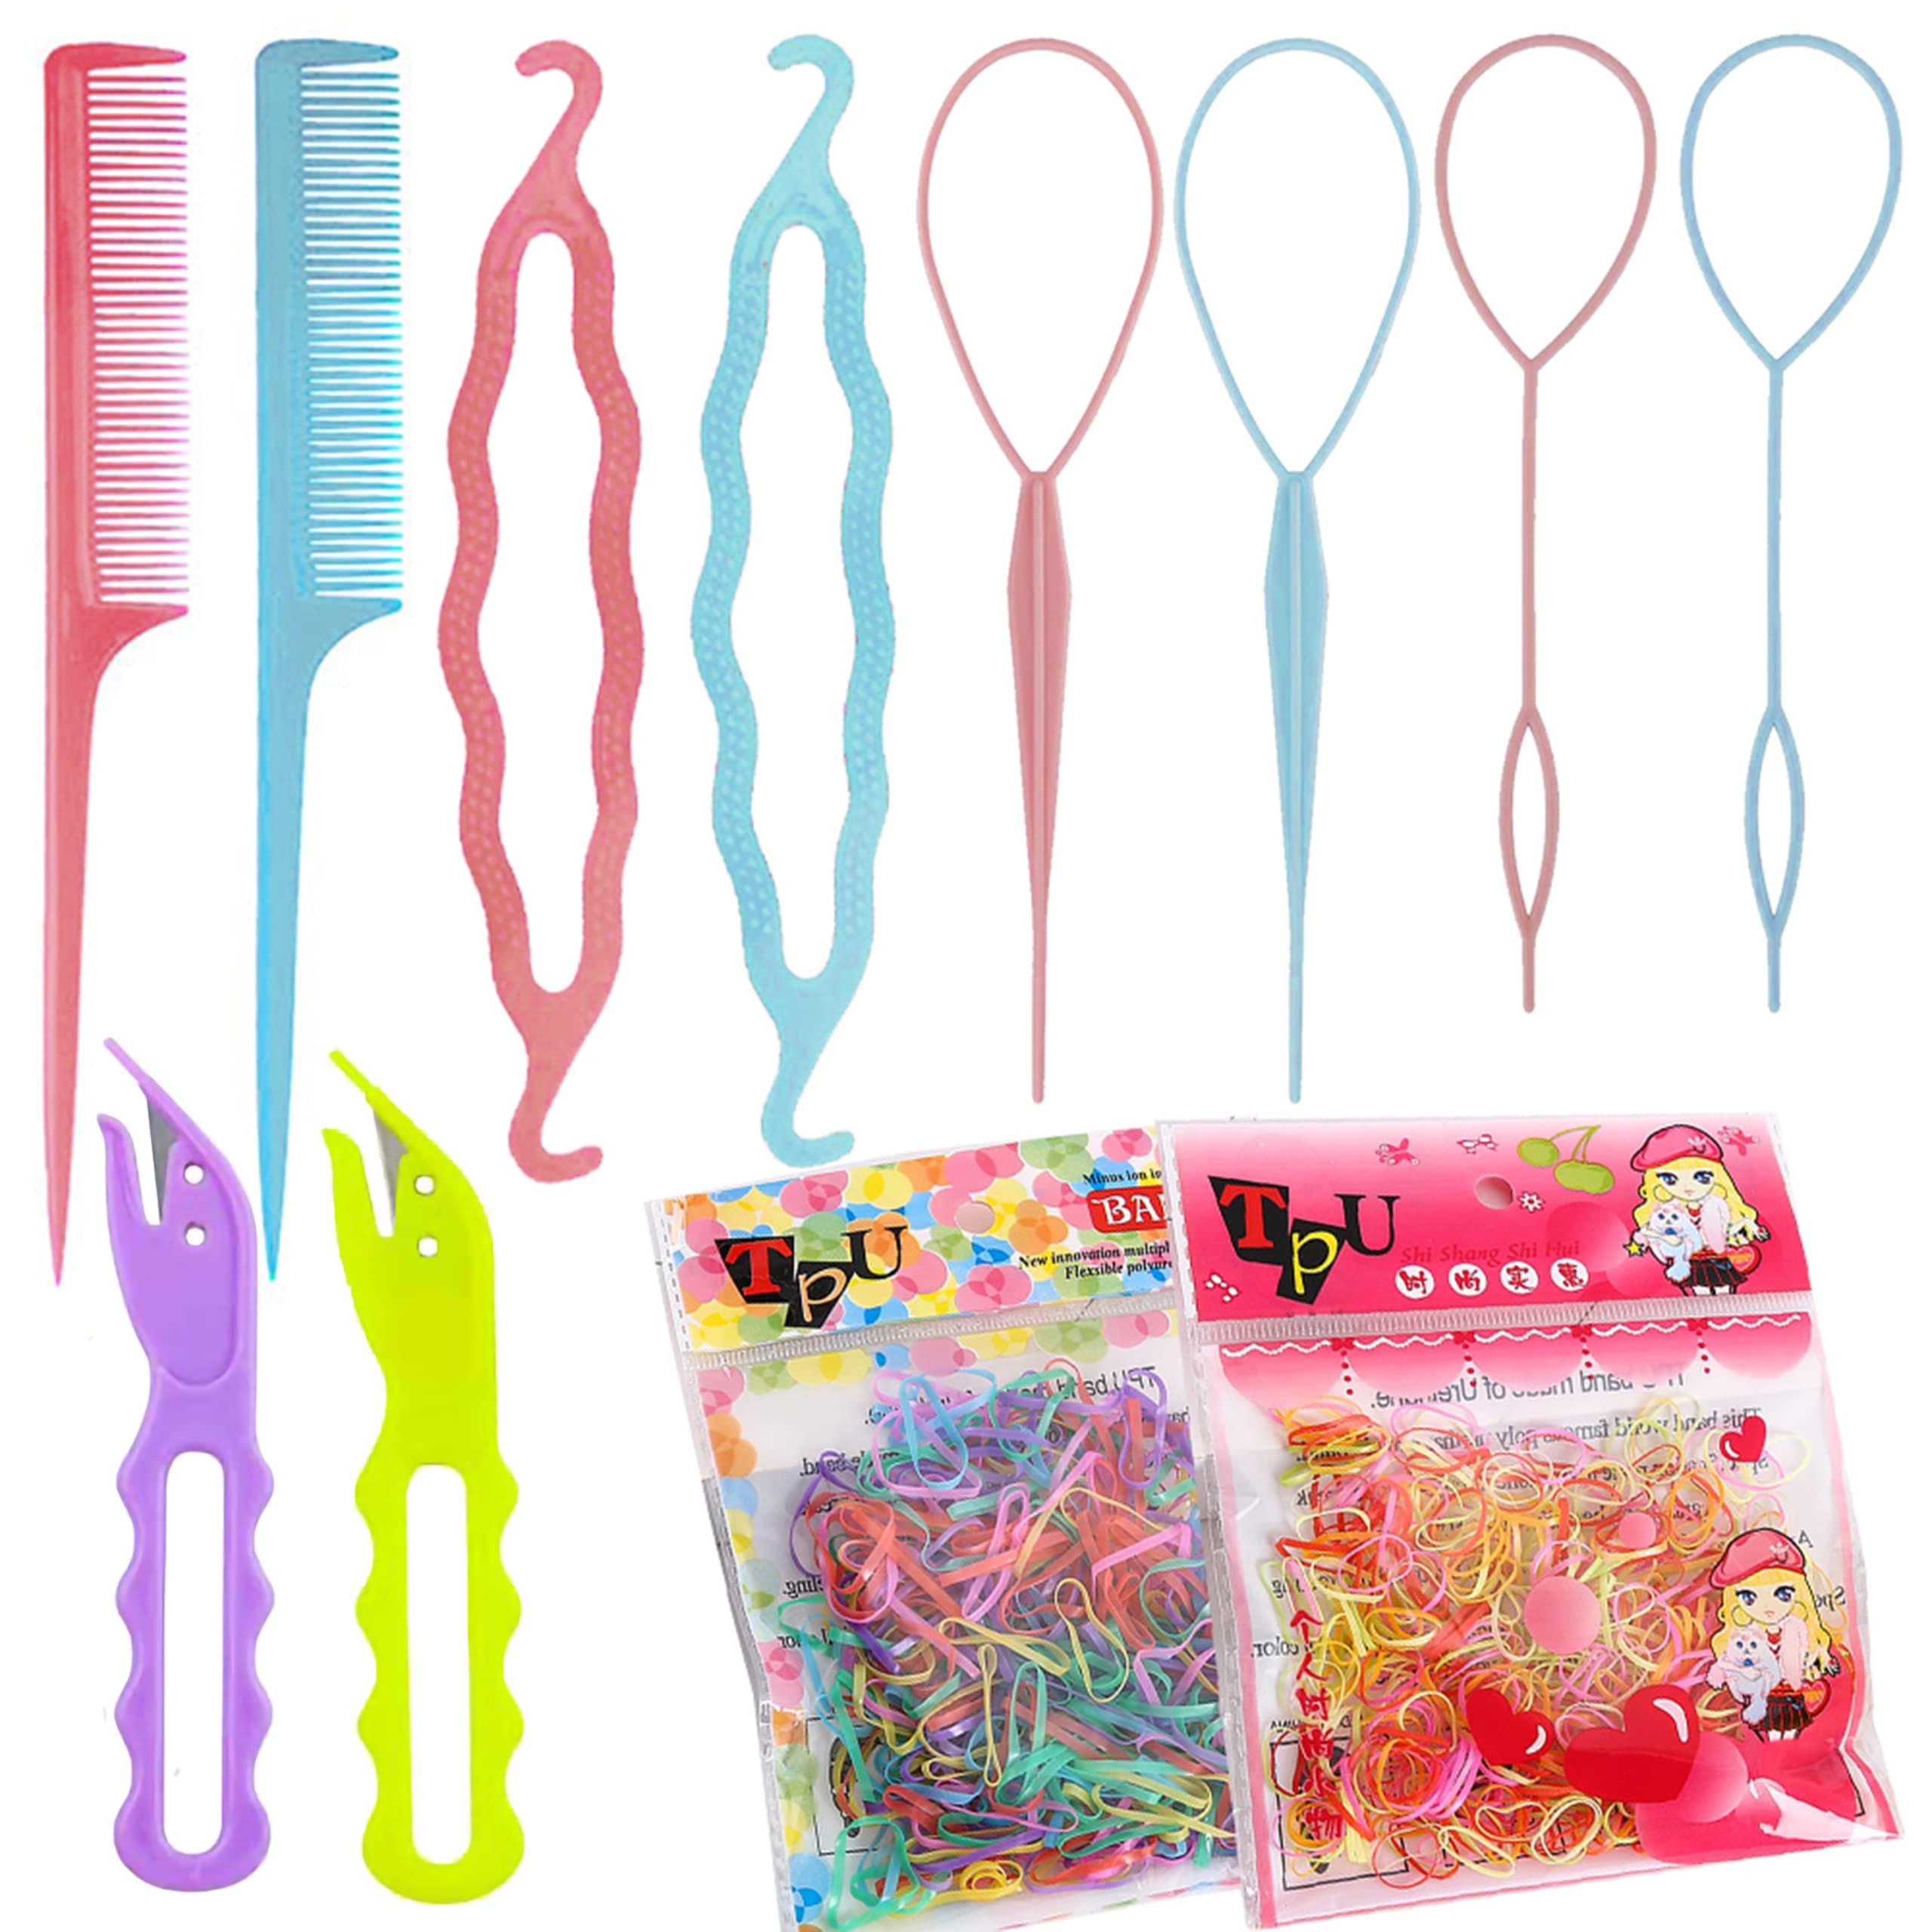 10Pcs Hair Loop Tool Set with 4 Topsy Tail Hair Tools 1 Ponytail Cutter  Remover 1 Metal Pin Rat Tail Comb for Hair Styling 200 Summer Colors  thicken Rubber Bands for Women